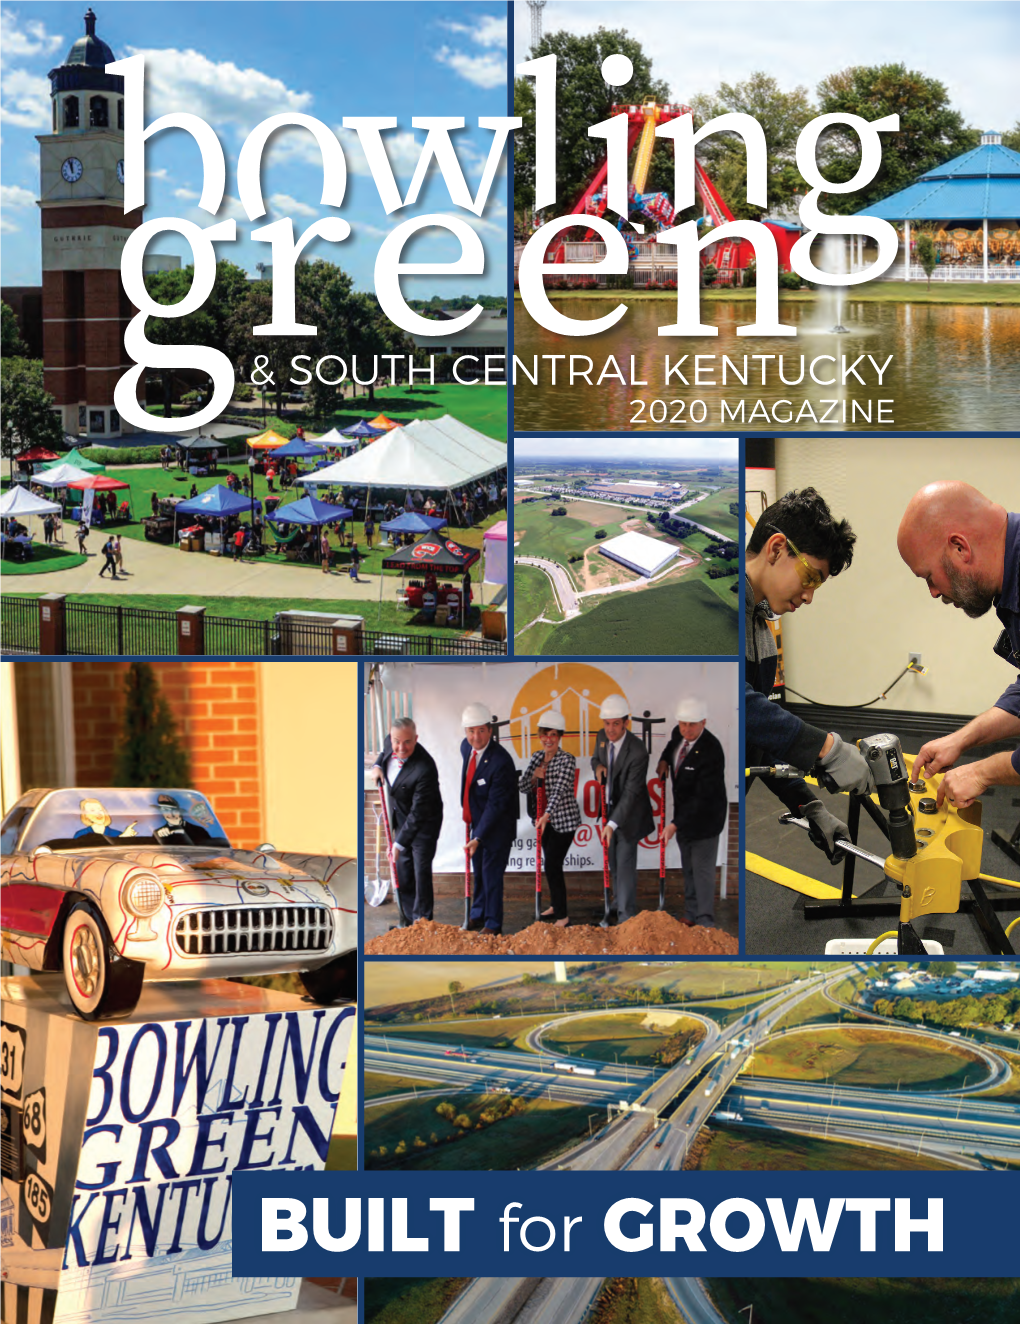 Bowling Green & South Central Kentucky Magazine